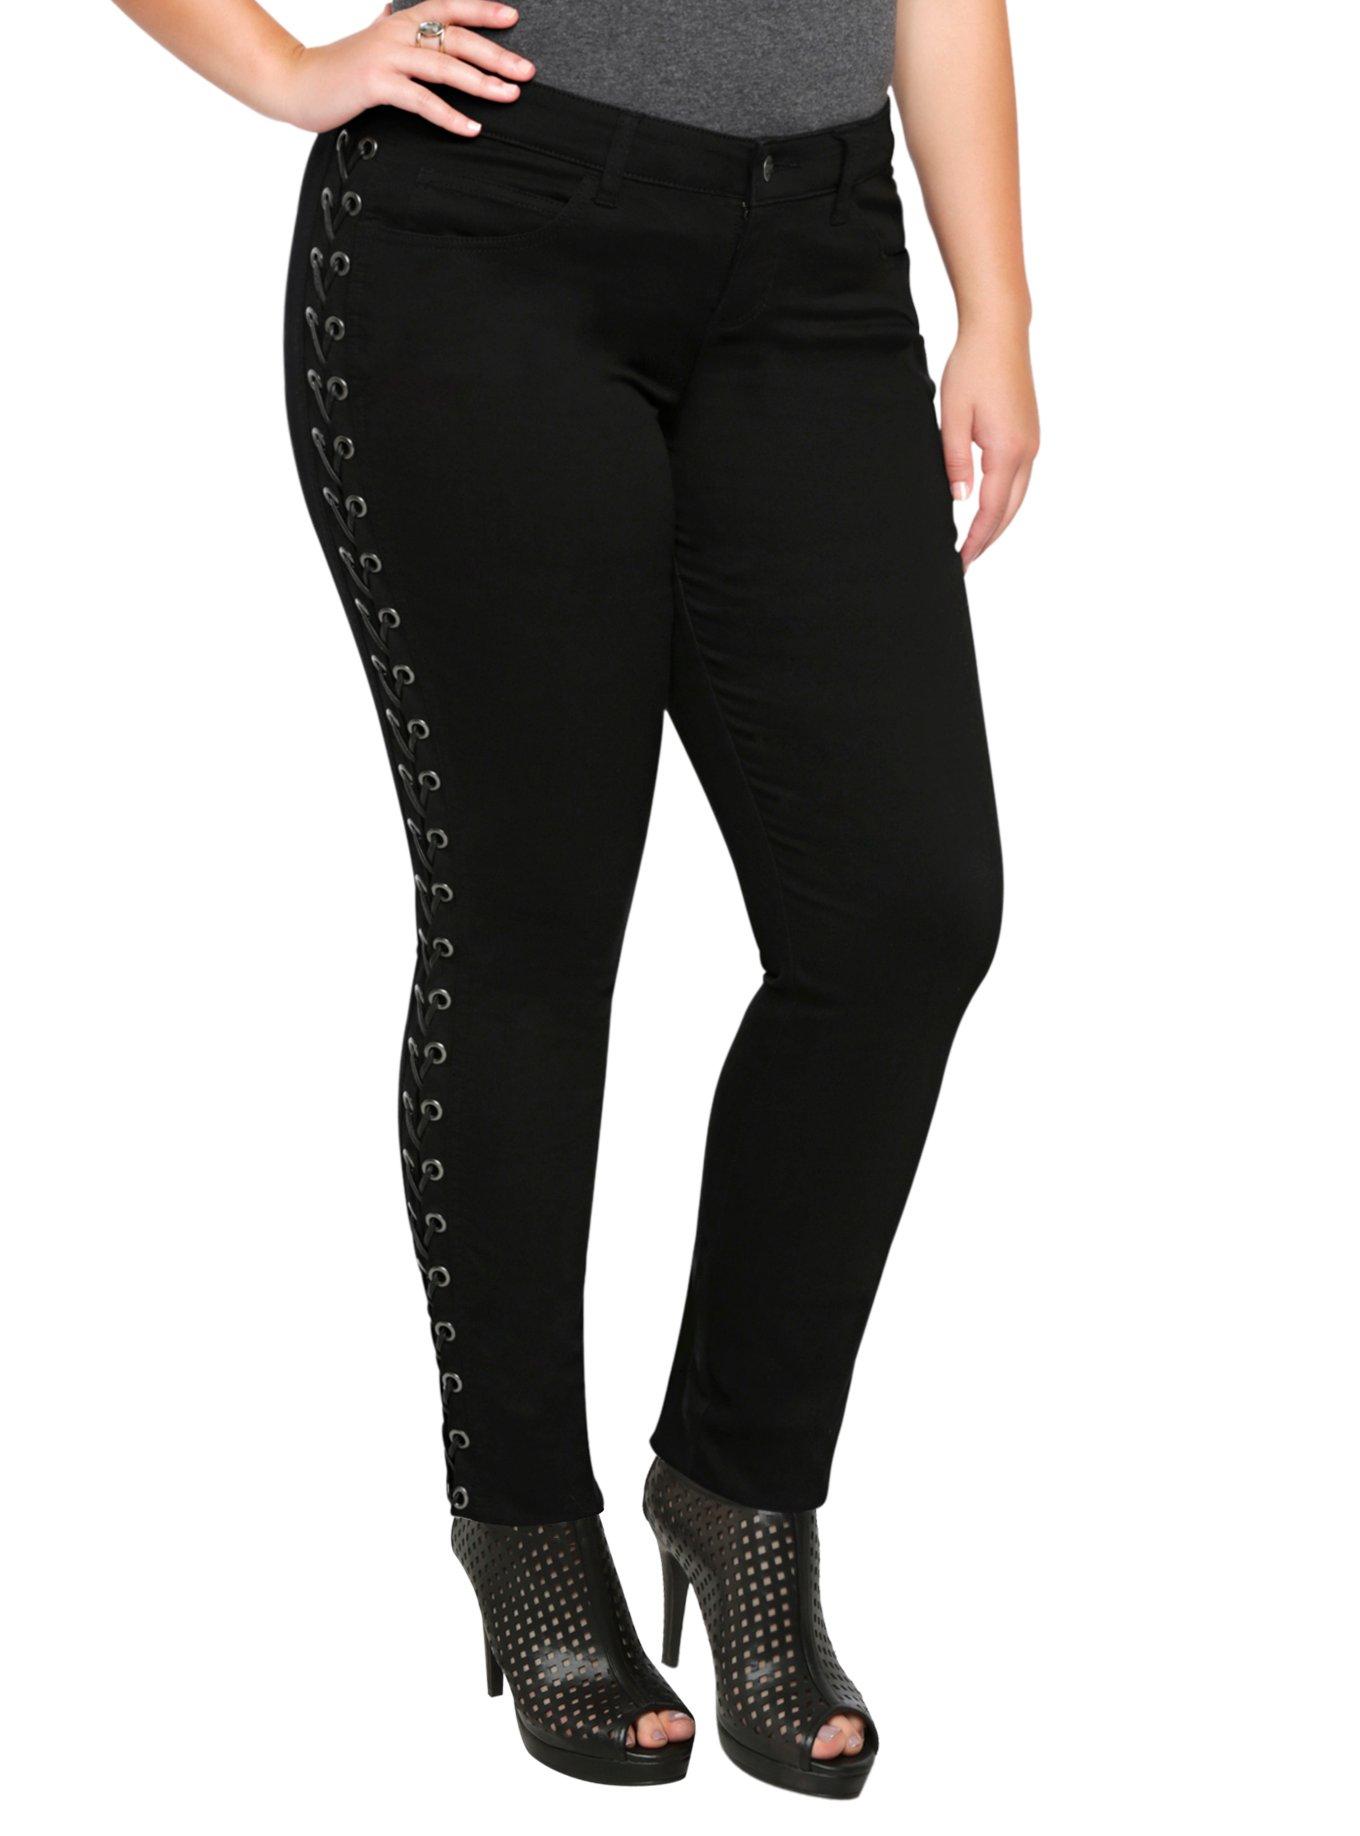 Tripp Black Lace-Up Skinny Jeans Plus Size | Hot Topic